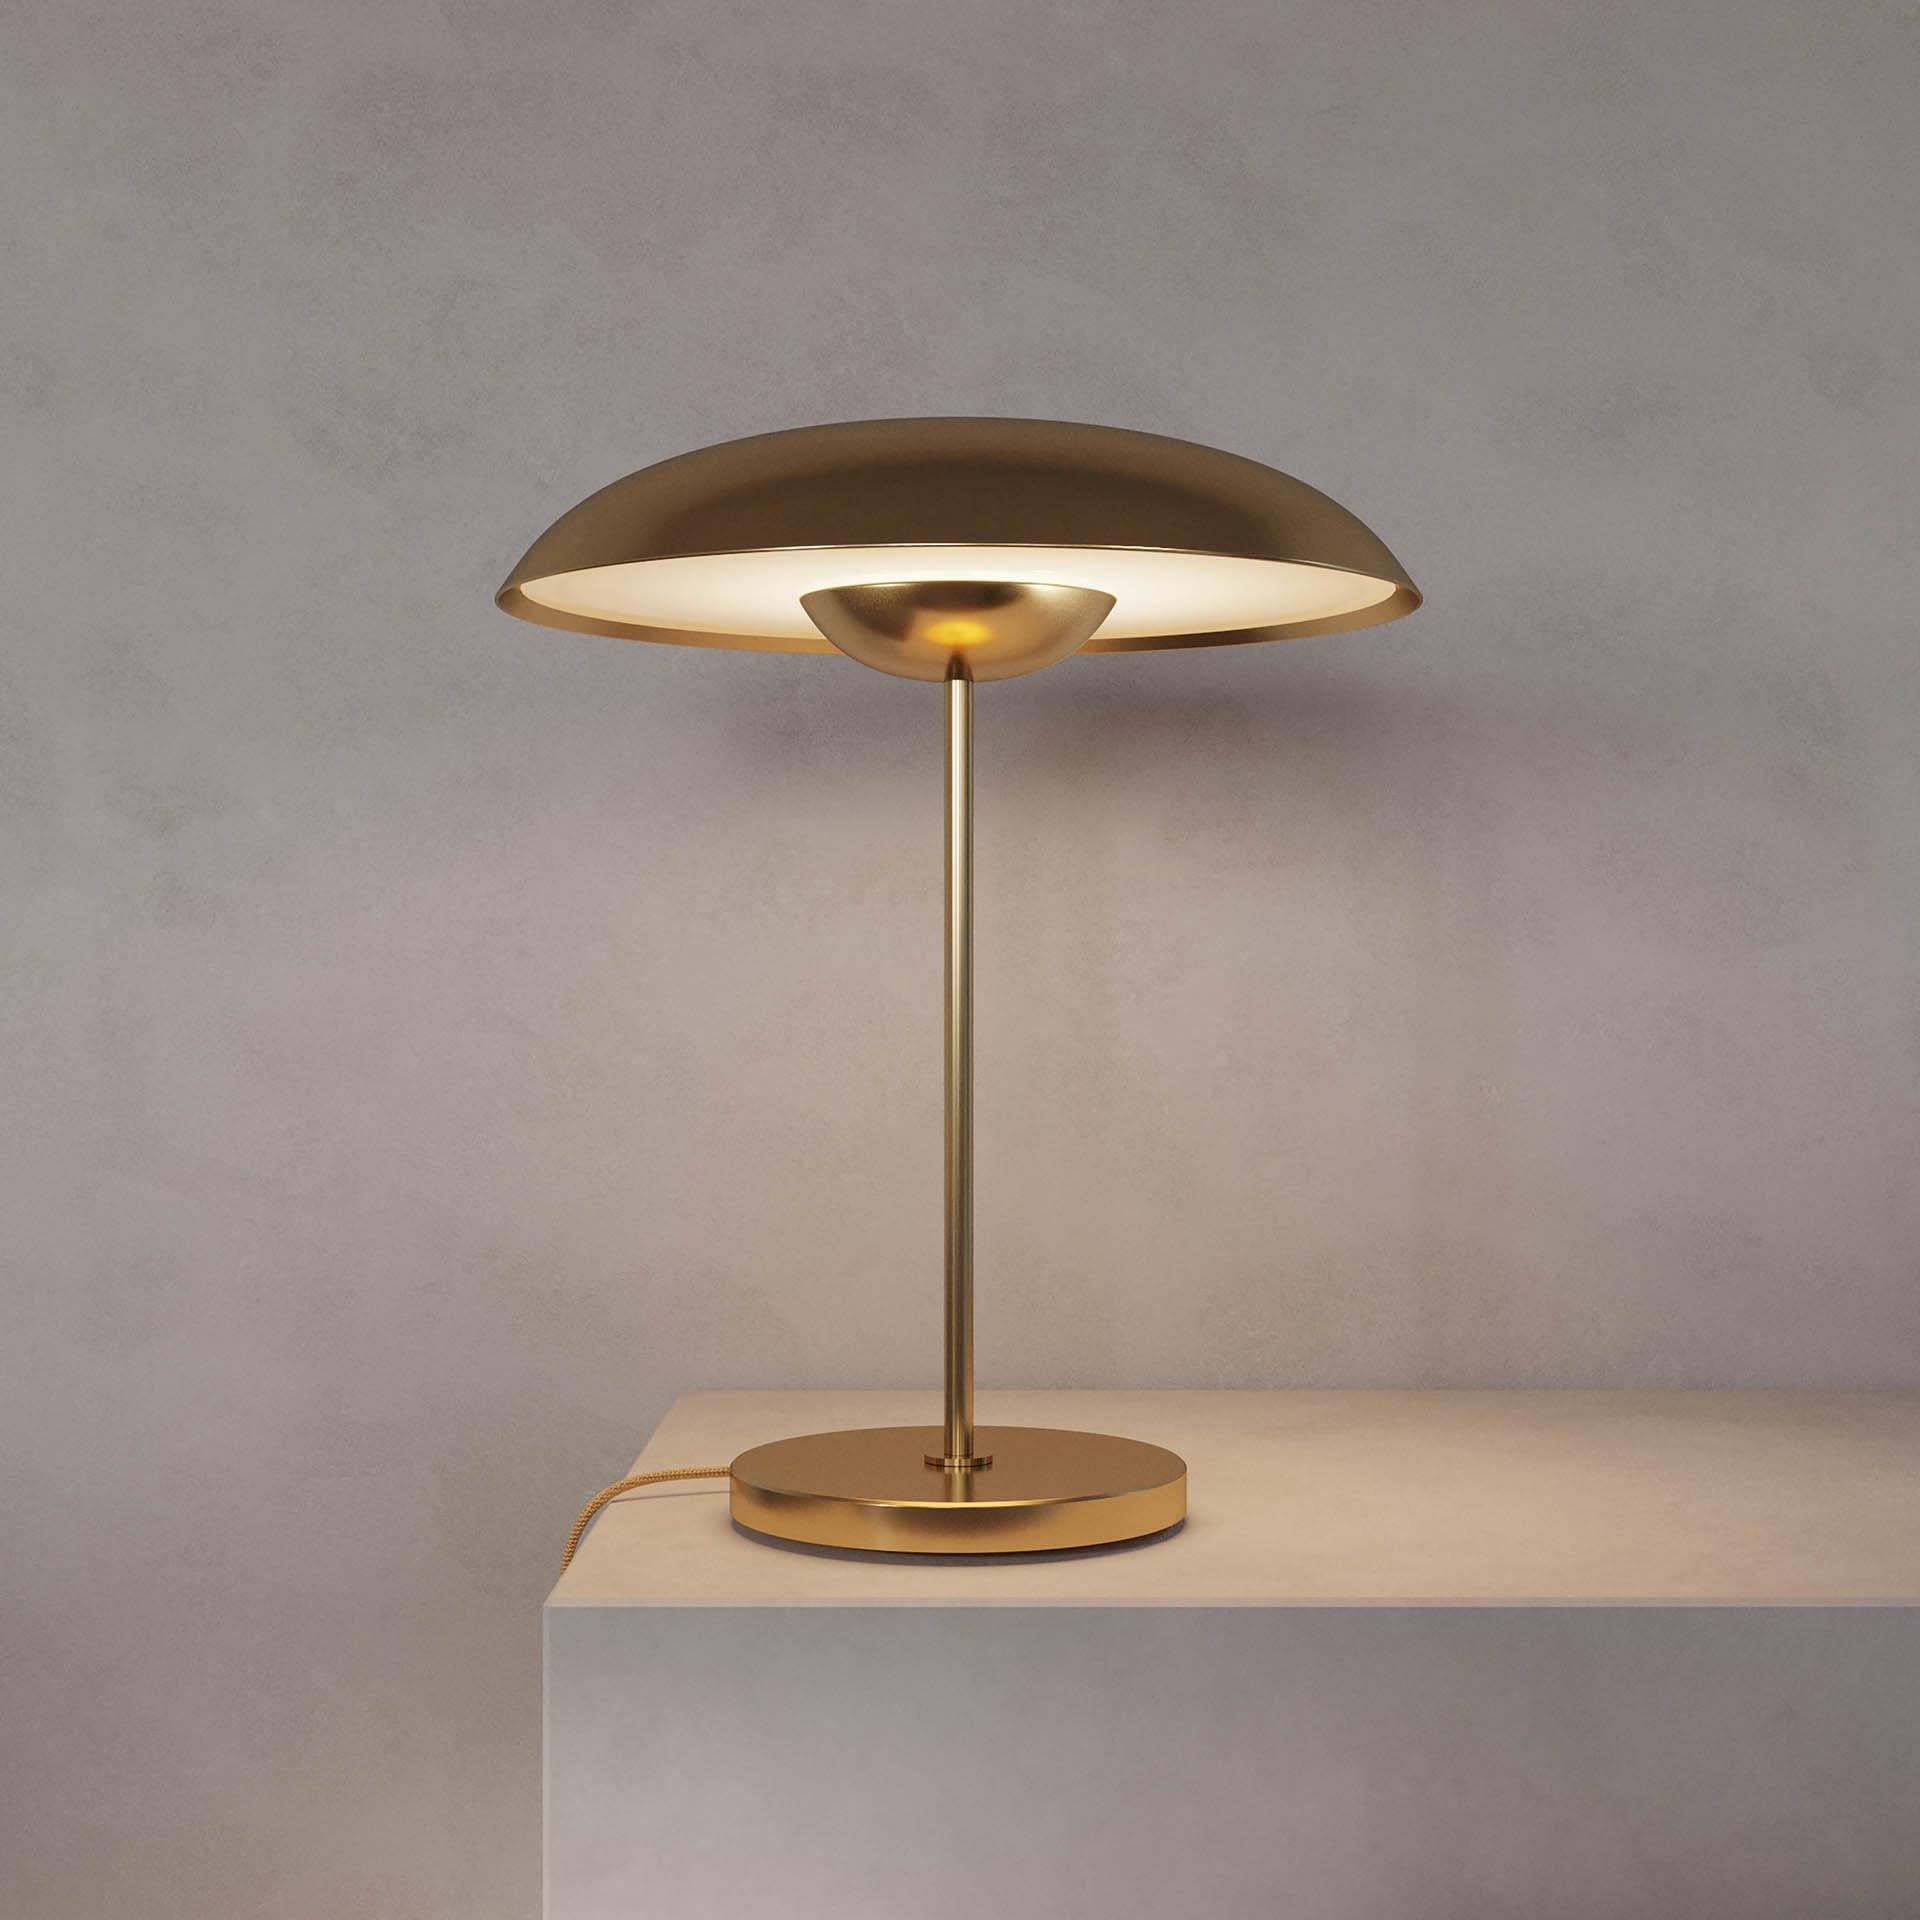 British 'Cosmic Solstice Aurum' Table Lamp, Handmade High Polished Brass Table Light For Sale